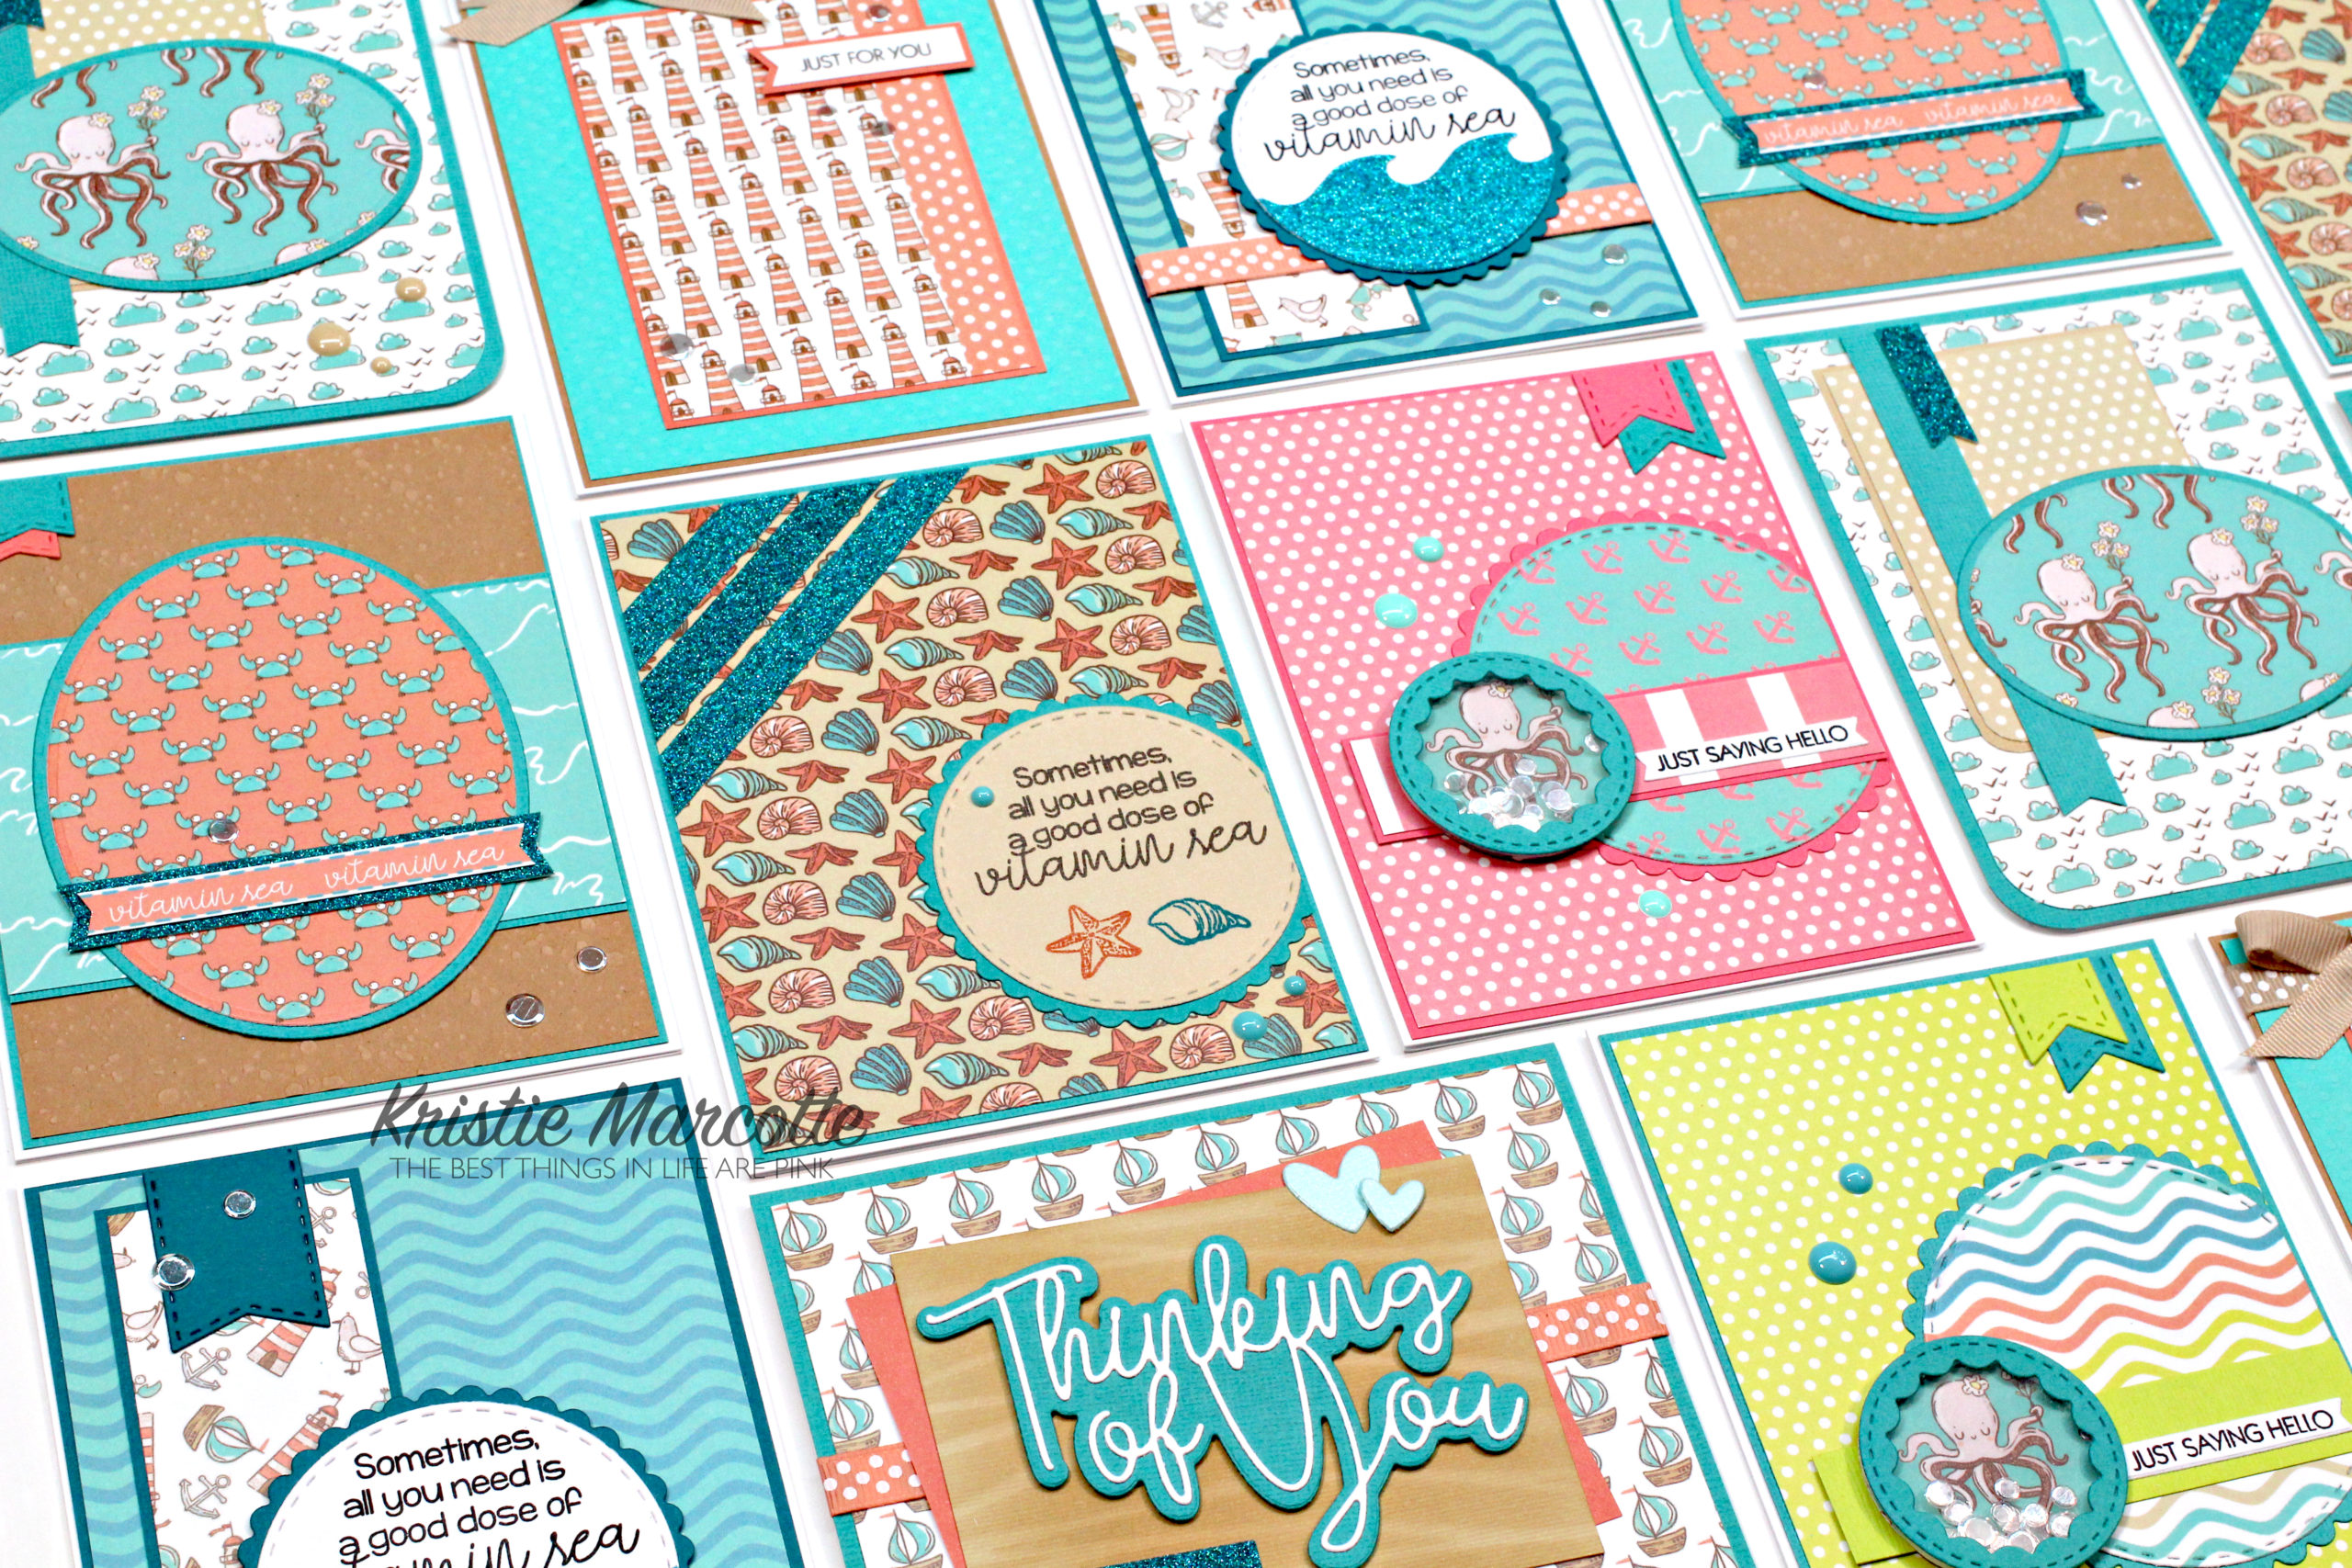 Pink & Main’s June 2020 Subscription box – 14 cards 1 kit